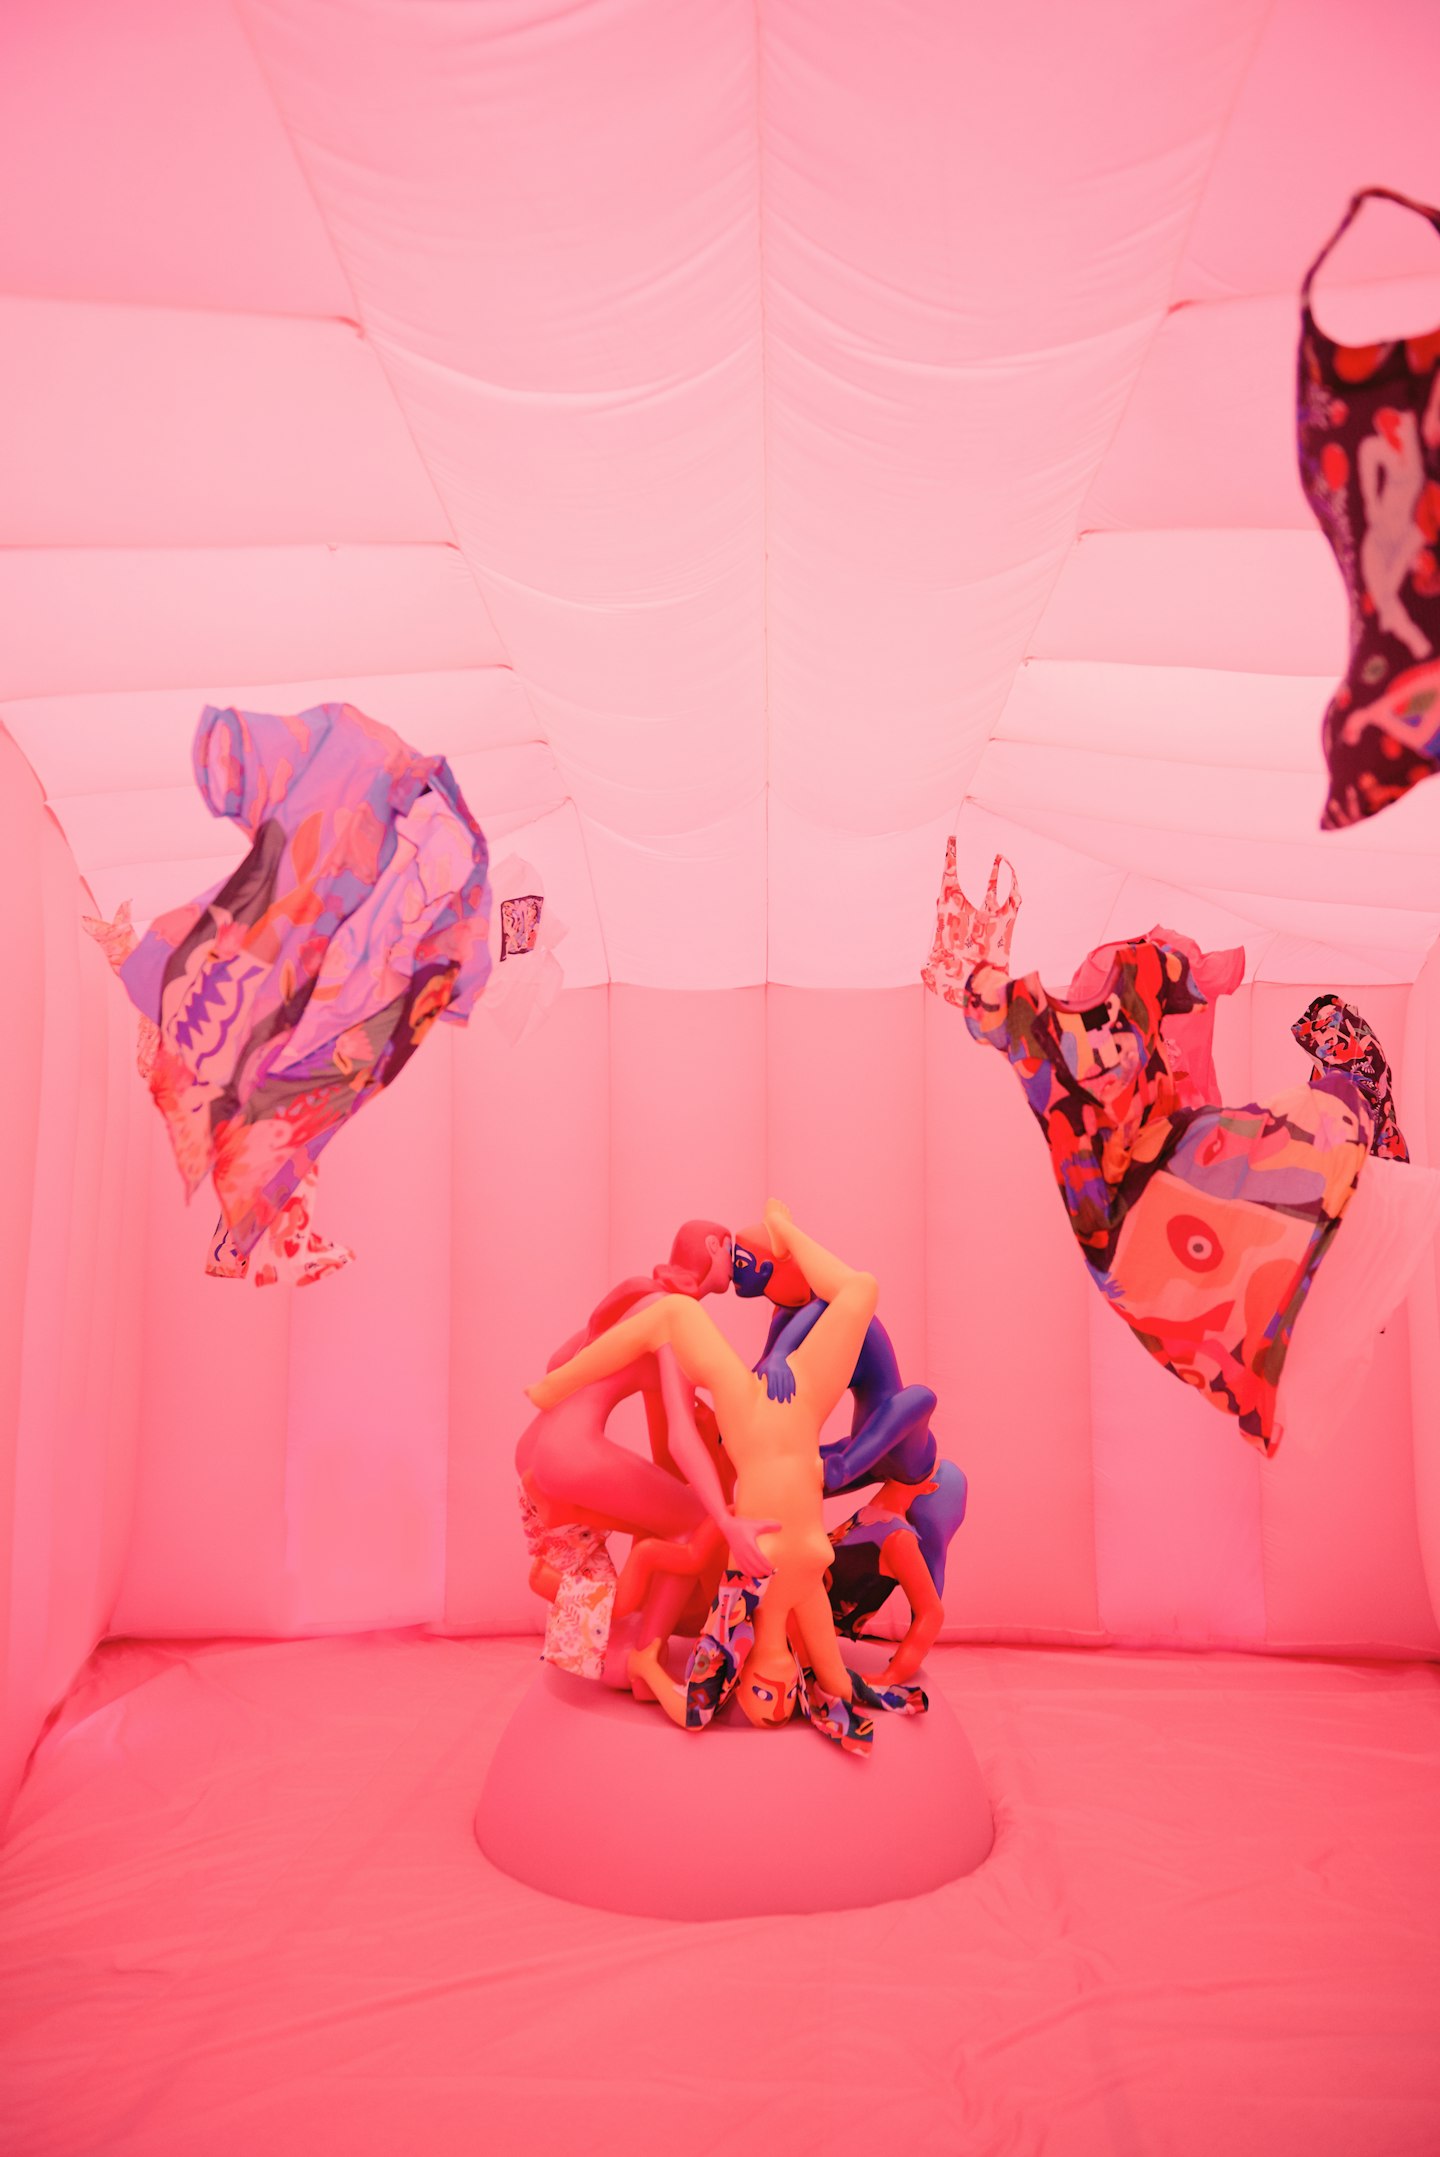  A general view of atmosphere during the Desigual X Miranda Makaroff sexhibition cocktail party during Art Basel Miami Beach 2019